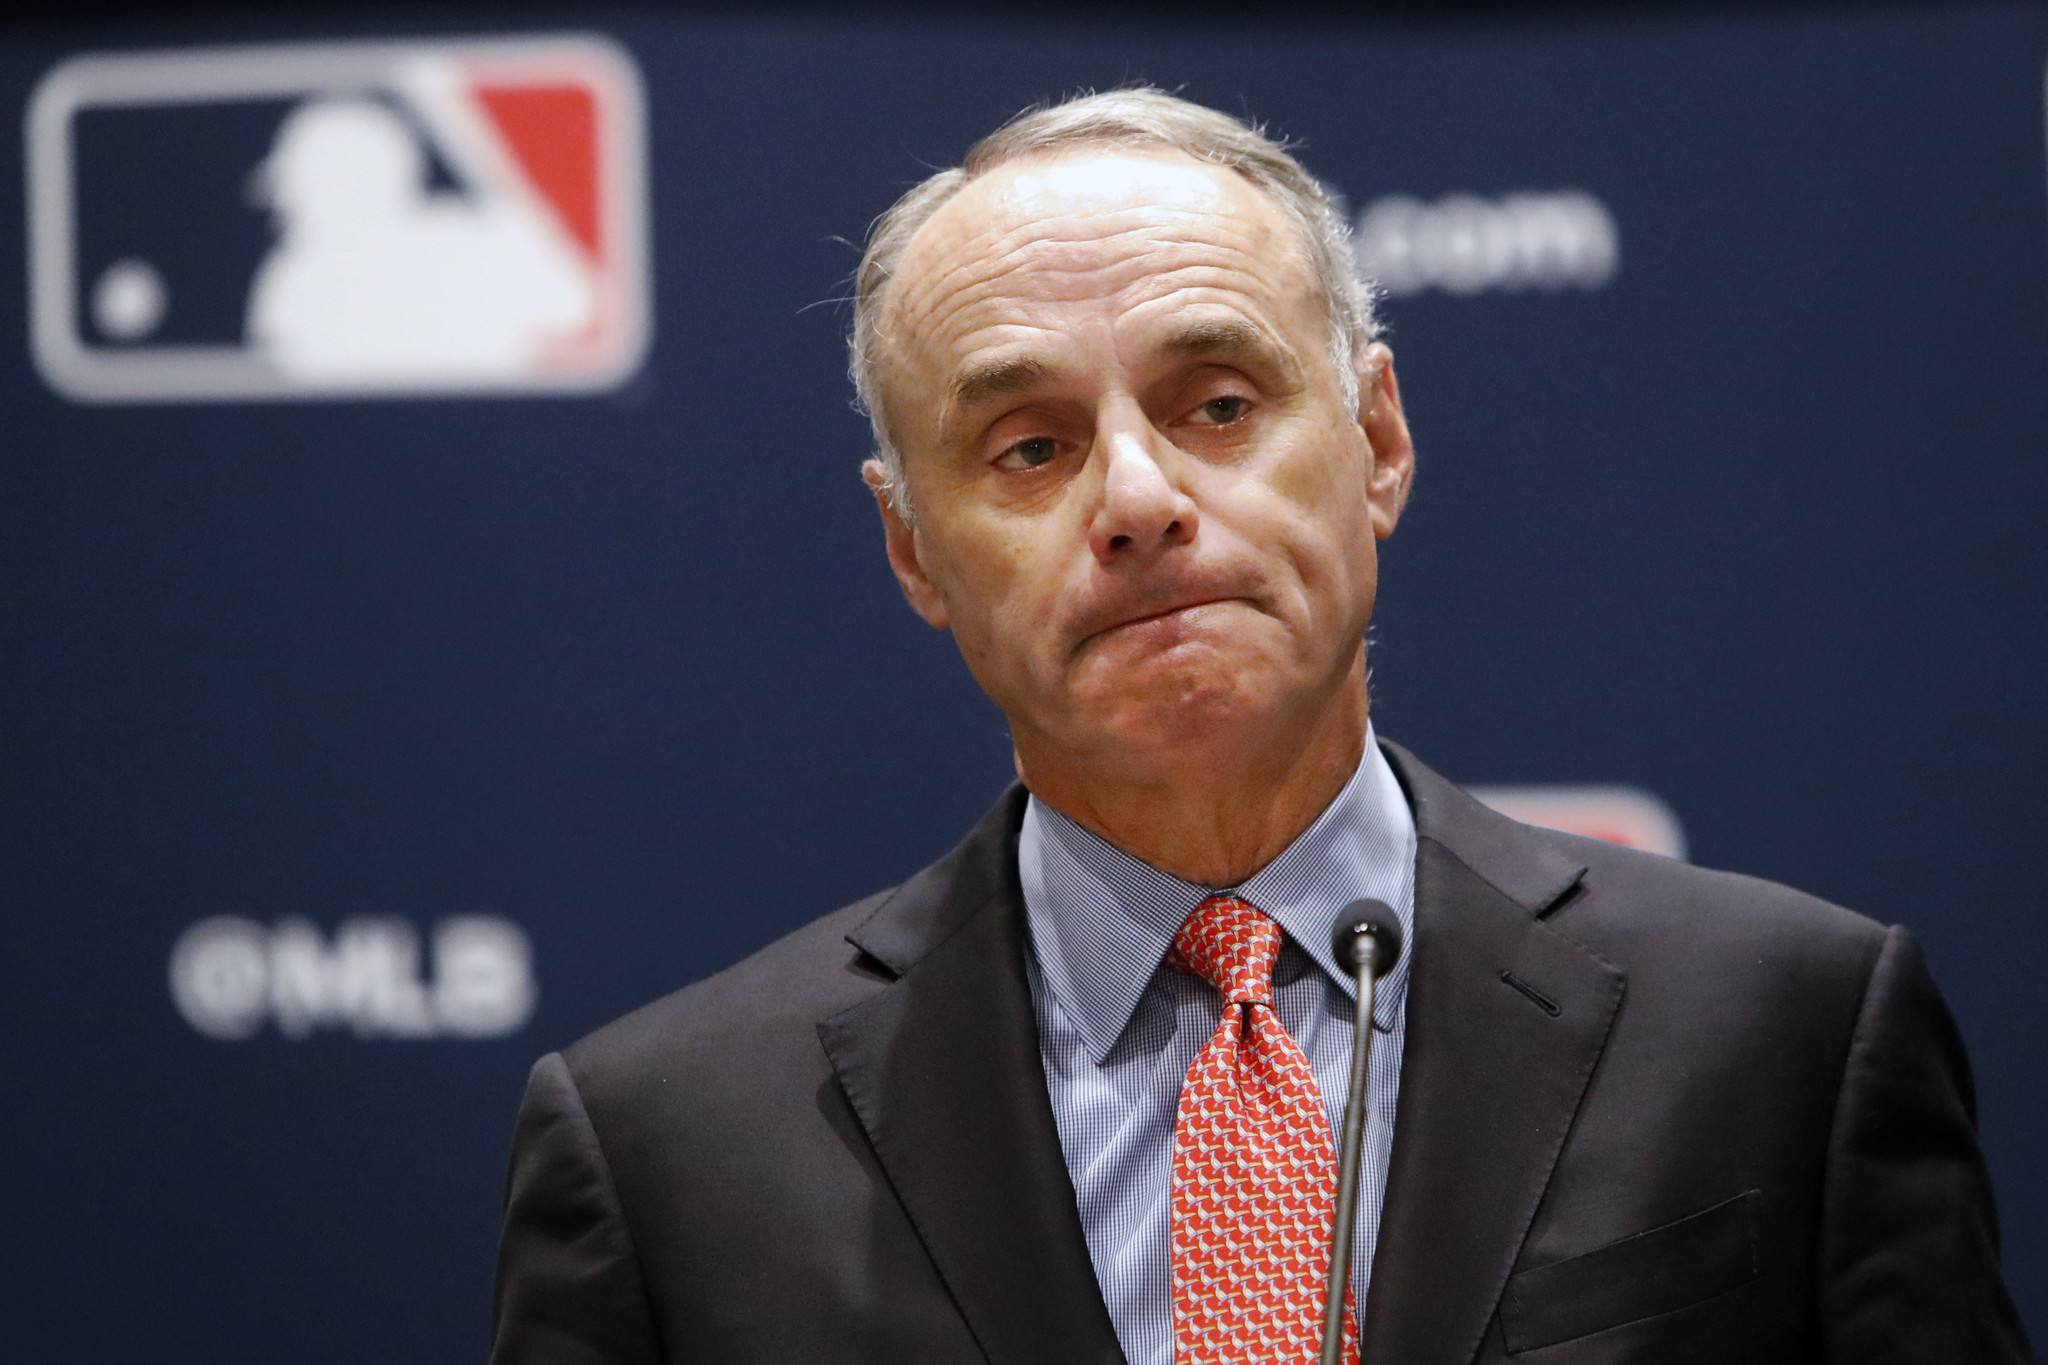 MLB’s plan to destroy the minor leagues sells baseball’s soul for pennies on the dollar